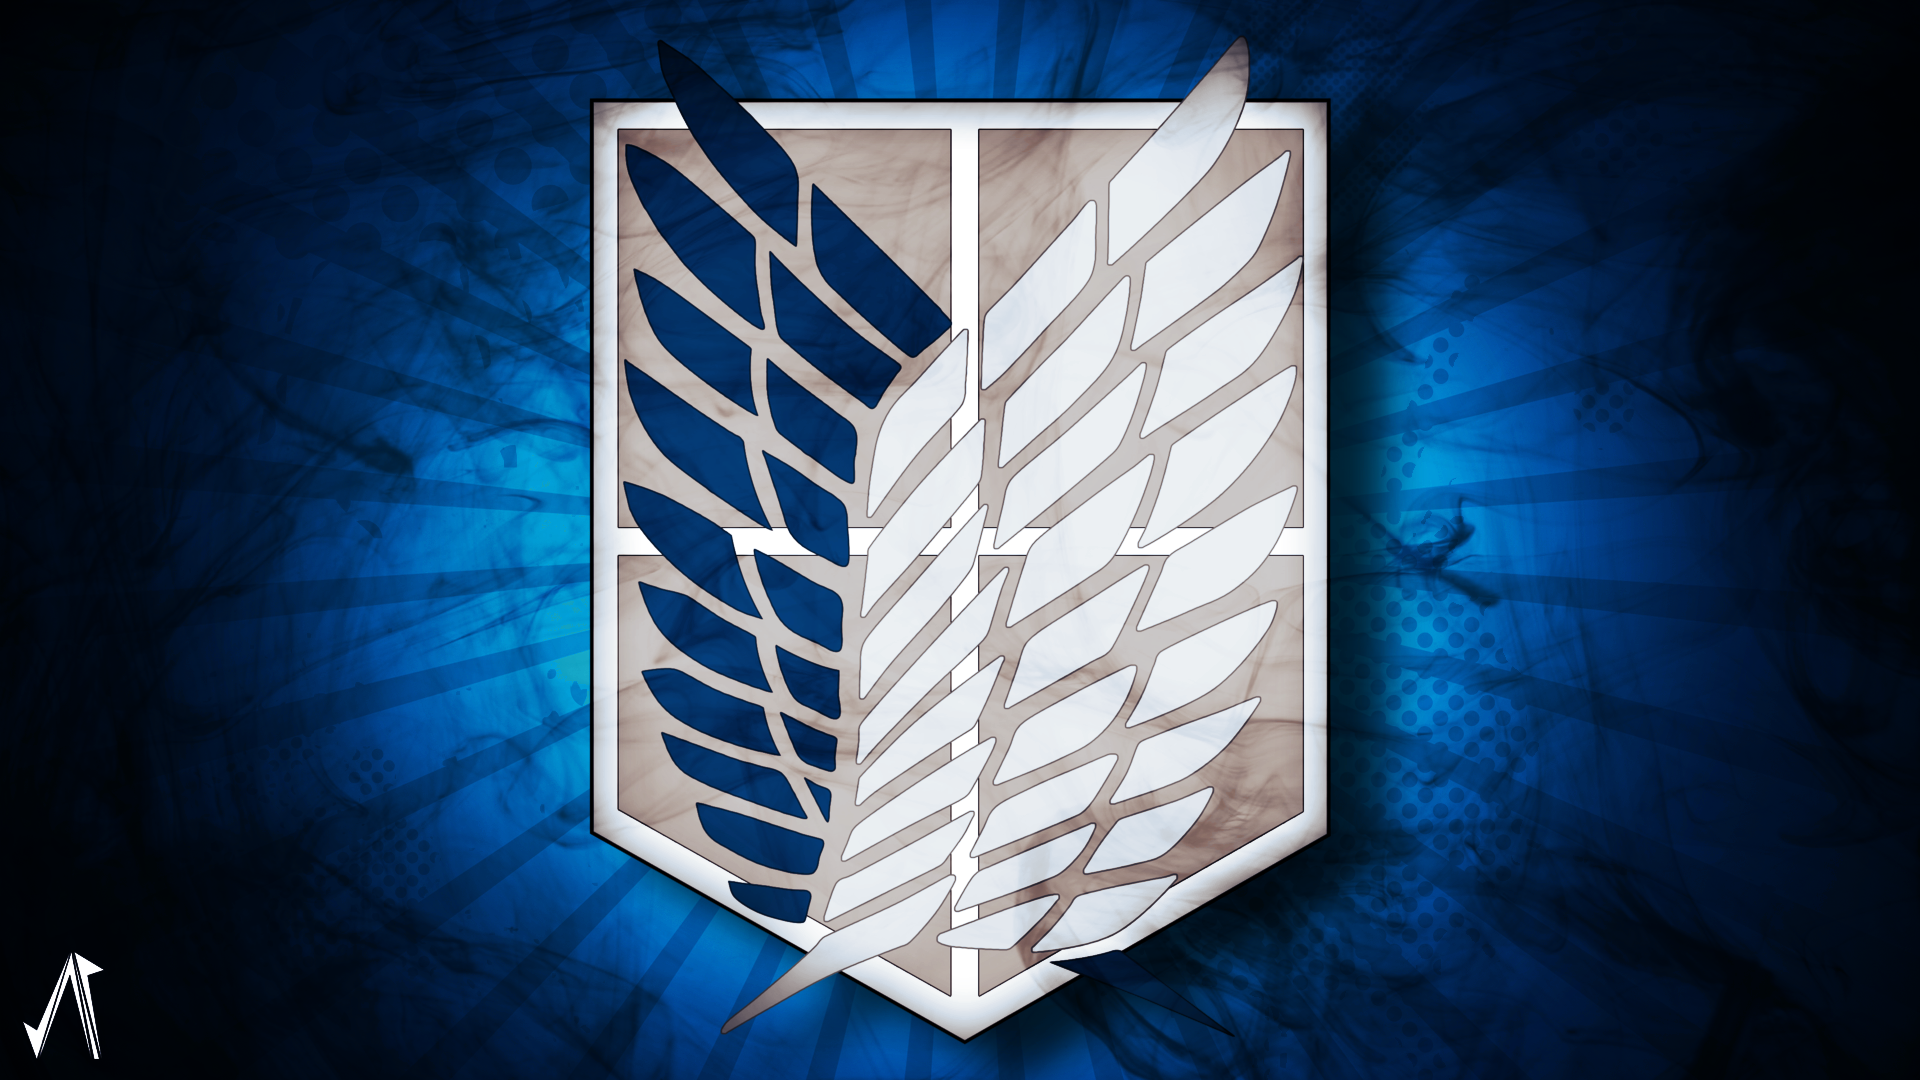 Free download The Survey Corps SnK by JustaninnocentPony [1920x1080] for your Desktop, Mobile & Tablet. Explore Wings of Freedom Wallpaper. Attack on Titan Logo Wallpaper